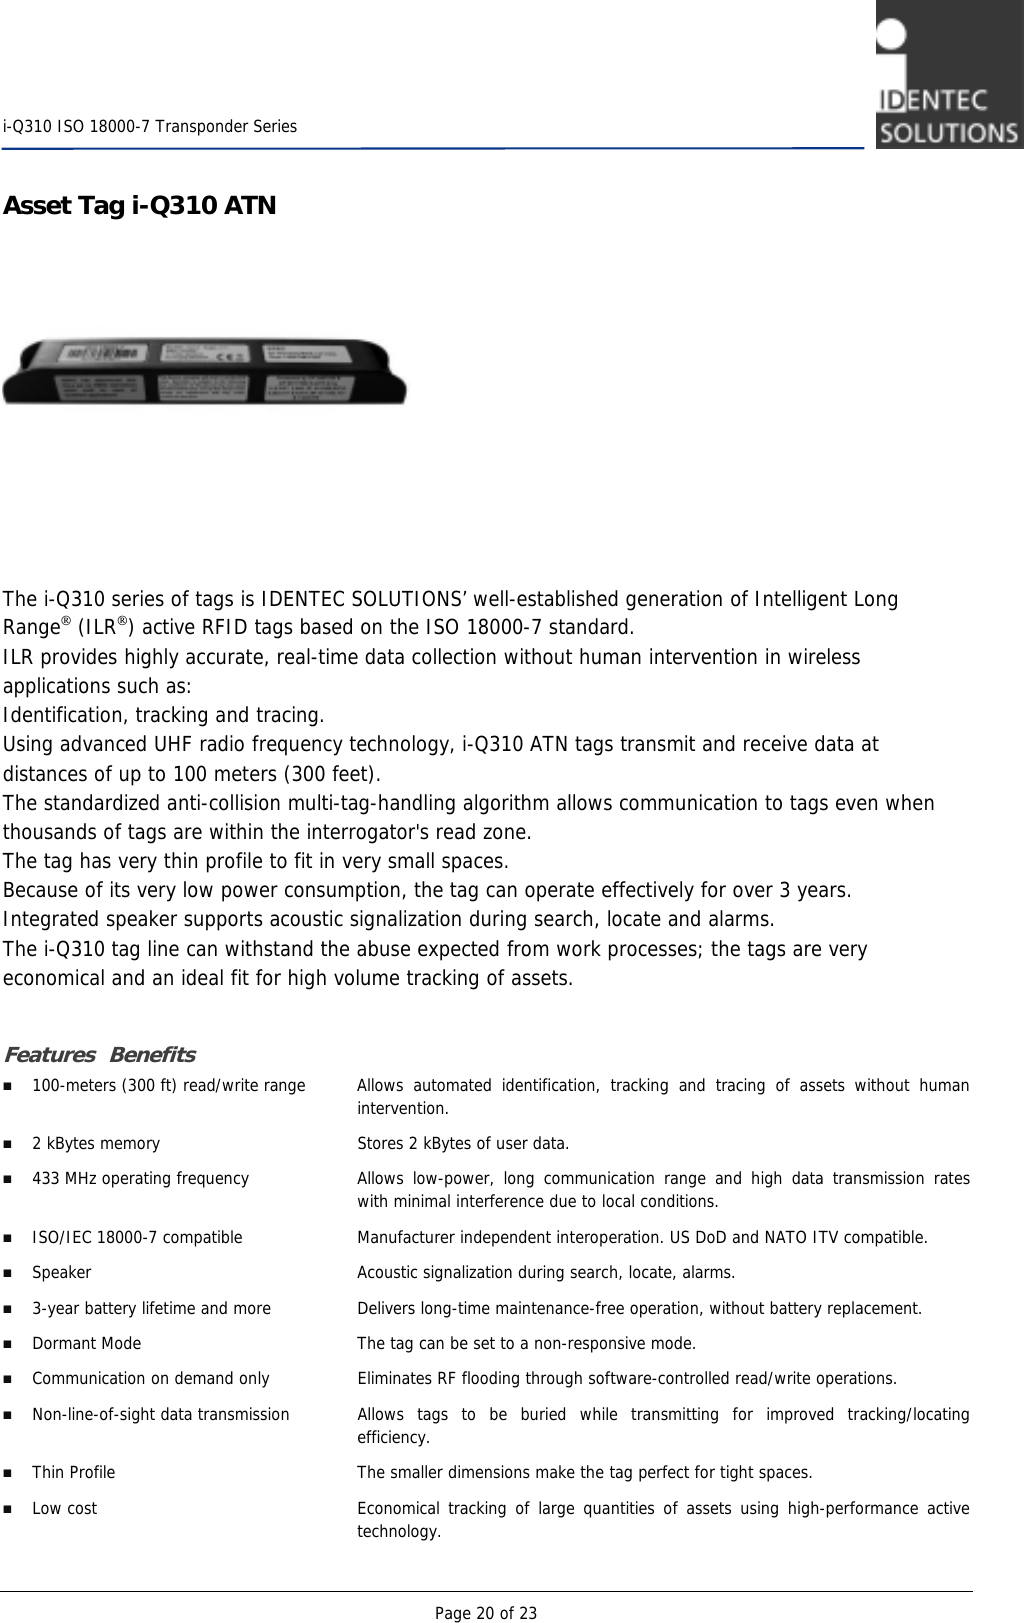    i-Q310 ISO 18000-7 Transponder Series  Page 20 of 23 Asset Tag i-Q310 ATN    The i-Q310 series of tags is IDENTEC SOLUTIONS’ well-established generation of Intelligent Long Range (ILR) active RFID tags based on the ISO 18000-7 standard.  ILR provides highly accurate, real-time data collection without human intervention in wireless applications such as: Identification, tracking and tracing. Using advanced UHF radio frequency technology, i-Q310 ATN tags transmit and receive data at distances of up to 100 meters (300 feet). The standardized anti-collision multi-tag-handling algorithm allows communication to tags even when thousands of tags are within the interrogator&apos;s read zone. The tag has very thin profile to fit in very small spaces. Because of its very low power consumption, the tag can operate effectively for over 3 years.  Integrated speaker supports acoustic signalization during search, locate and alarms. The i-Q310 tag line can withstand the abuse expected from work processes; the tags are very economical and an ideal fit for high volume tracking of assets.  Features Benefits  100-meters (300 ft) read/write range  Allows automated identification, tracking and tracing of assets without human intervention.  2 kBytes memory  Stores 2 kBytes of user data.   433 MHz operating frequency  Allows low-power, long communication range and high data transmission rates with minimal interference due to local conditions.  ISO/IEC 18000-7 compatible  Manufacturer independent interoperation. US DoD and NATO ITV compatible.    Speaker   Acoustic signalization during search, locate, alarms.  3-year battery lifetime and more  Delivers long-time maintenance-free operation, without battery replacement.  Dormant Mode  The tag can be set to a non-responsive mode.  Communication on demand only  Eliminates RF flooding through software-controlled read/write operations.  Non-line-of-sight data transmission  Allows tags to be buried while transmitting for improved tracking/locating efficiency.   Thin Profile  The smaller dimensions make the tag perfect for tight spaces.  Low cost  Economical tracking of large quantities of assets using high-performance active technology. 